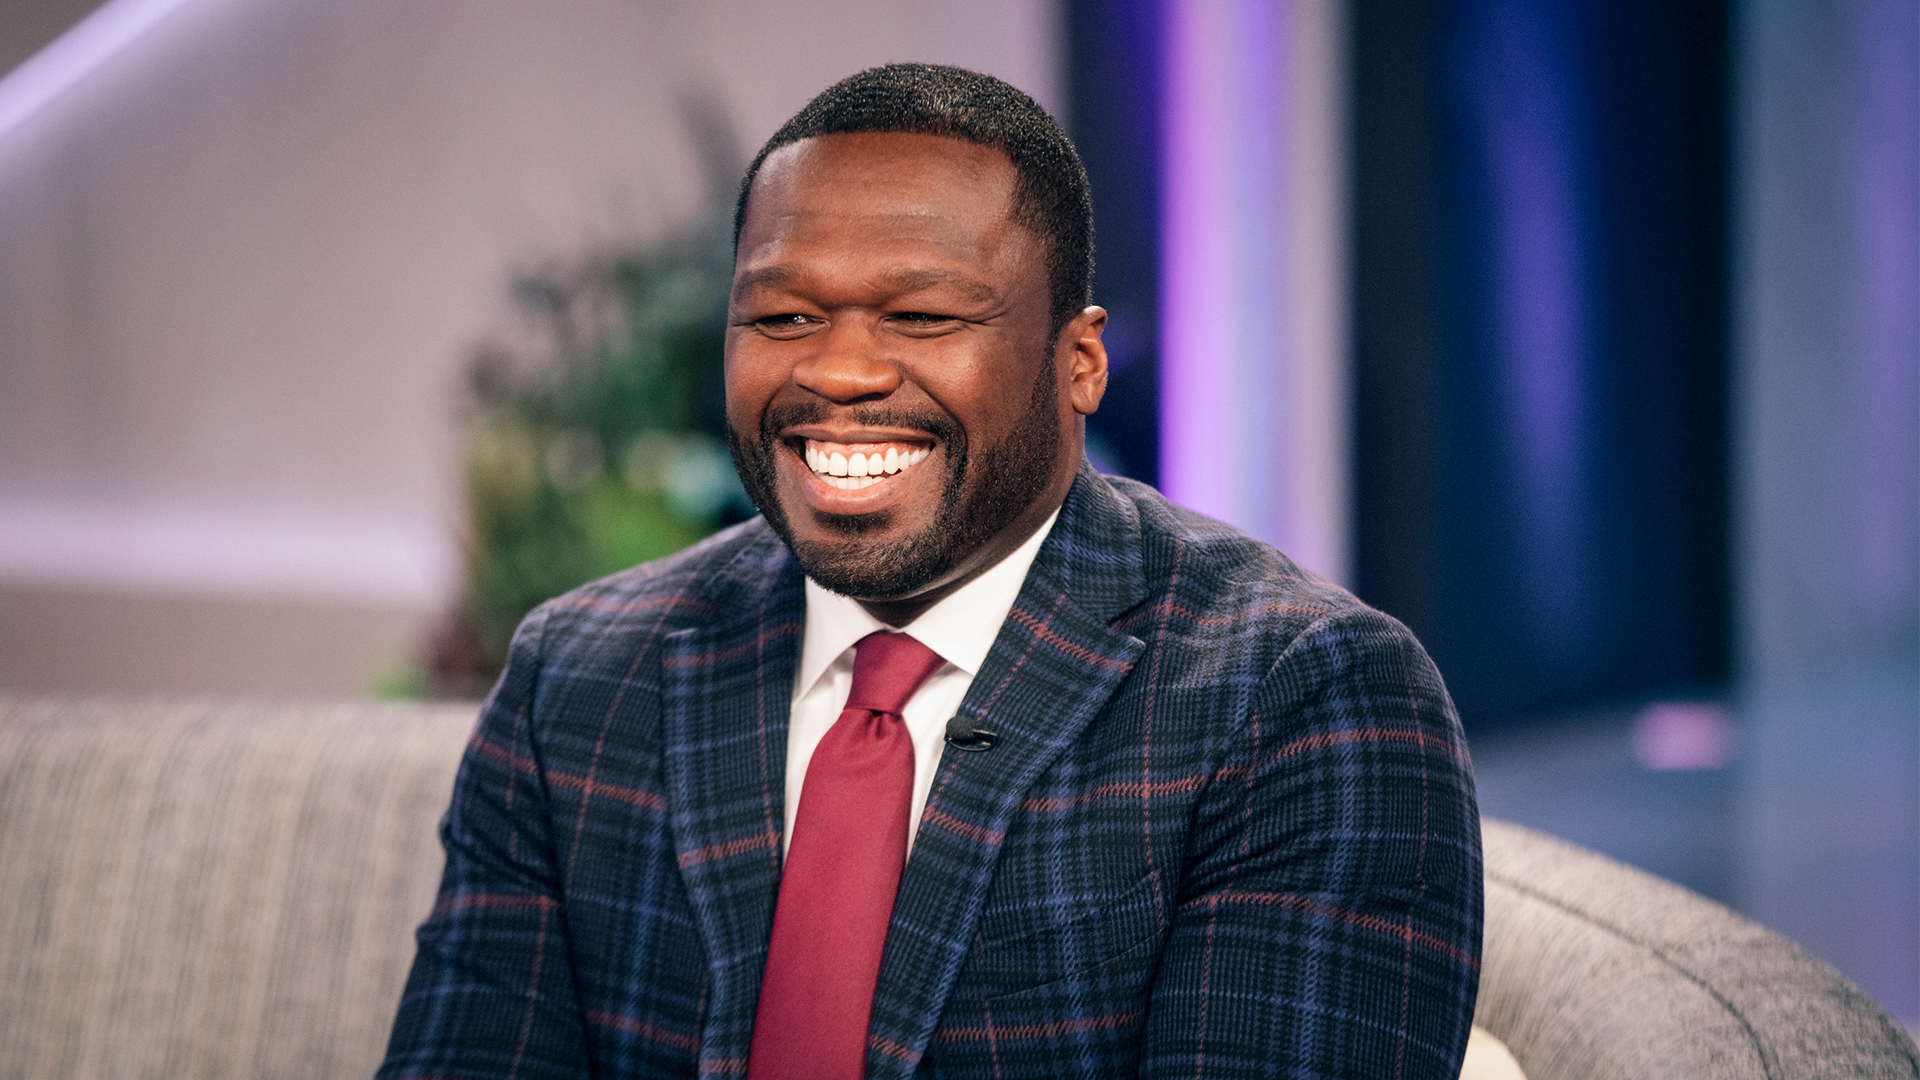 50 Cent Buys 985,000-Square-Foot Property To Develop Studio For G-Unit Film Division